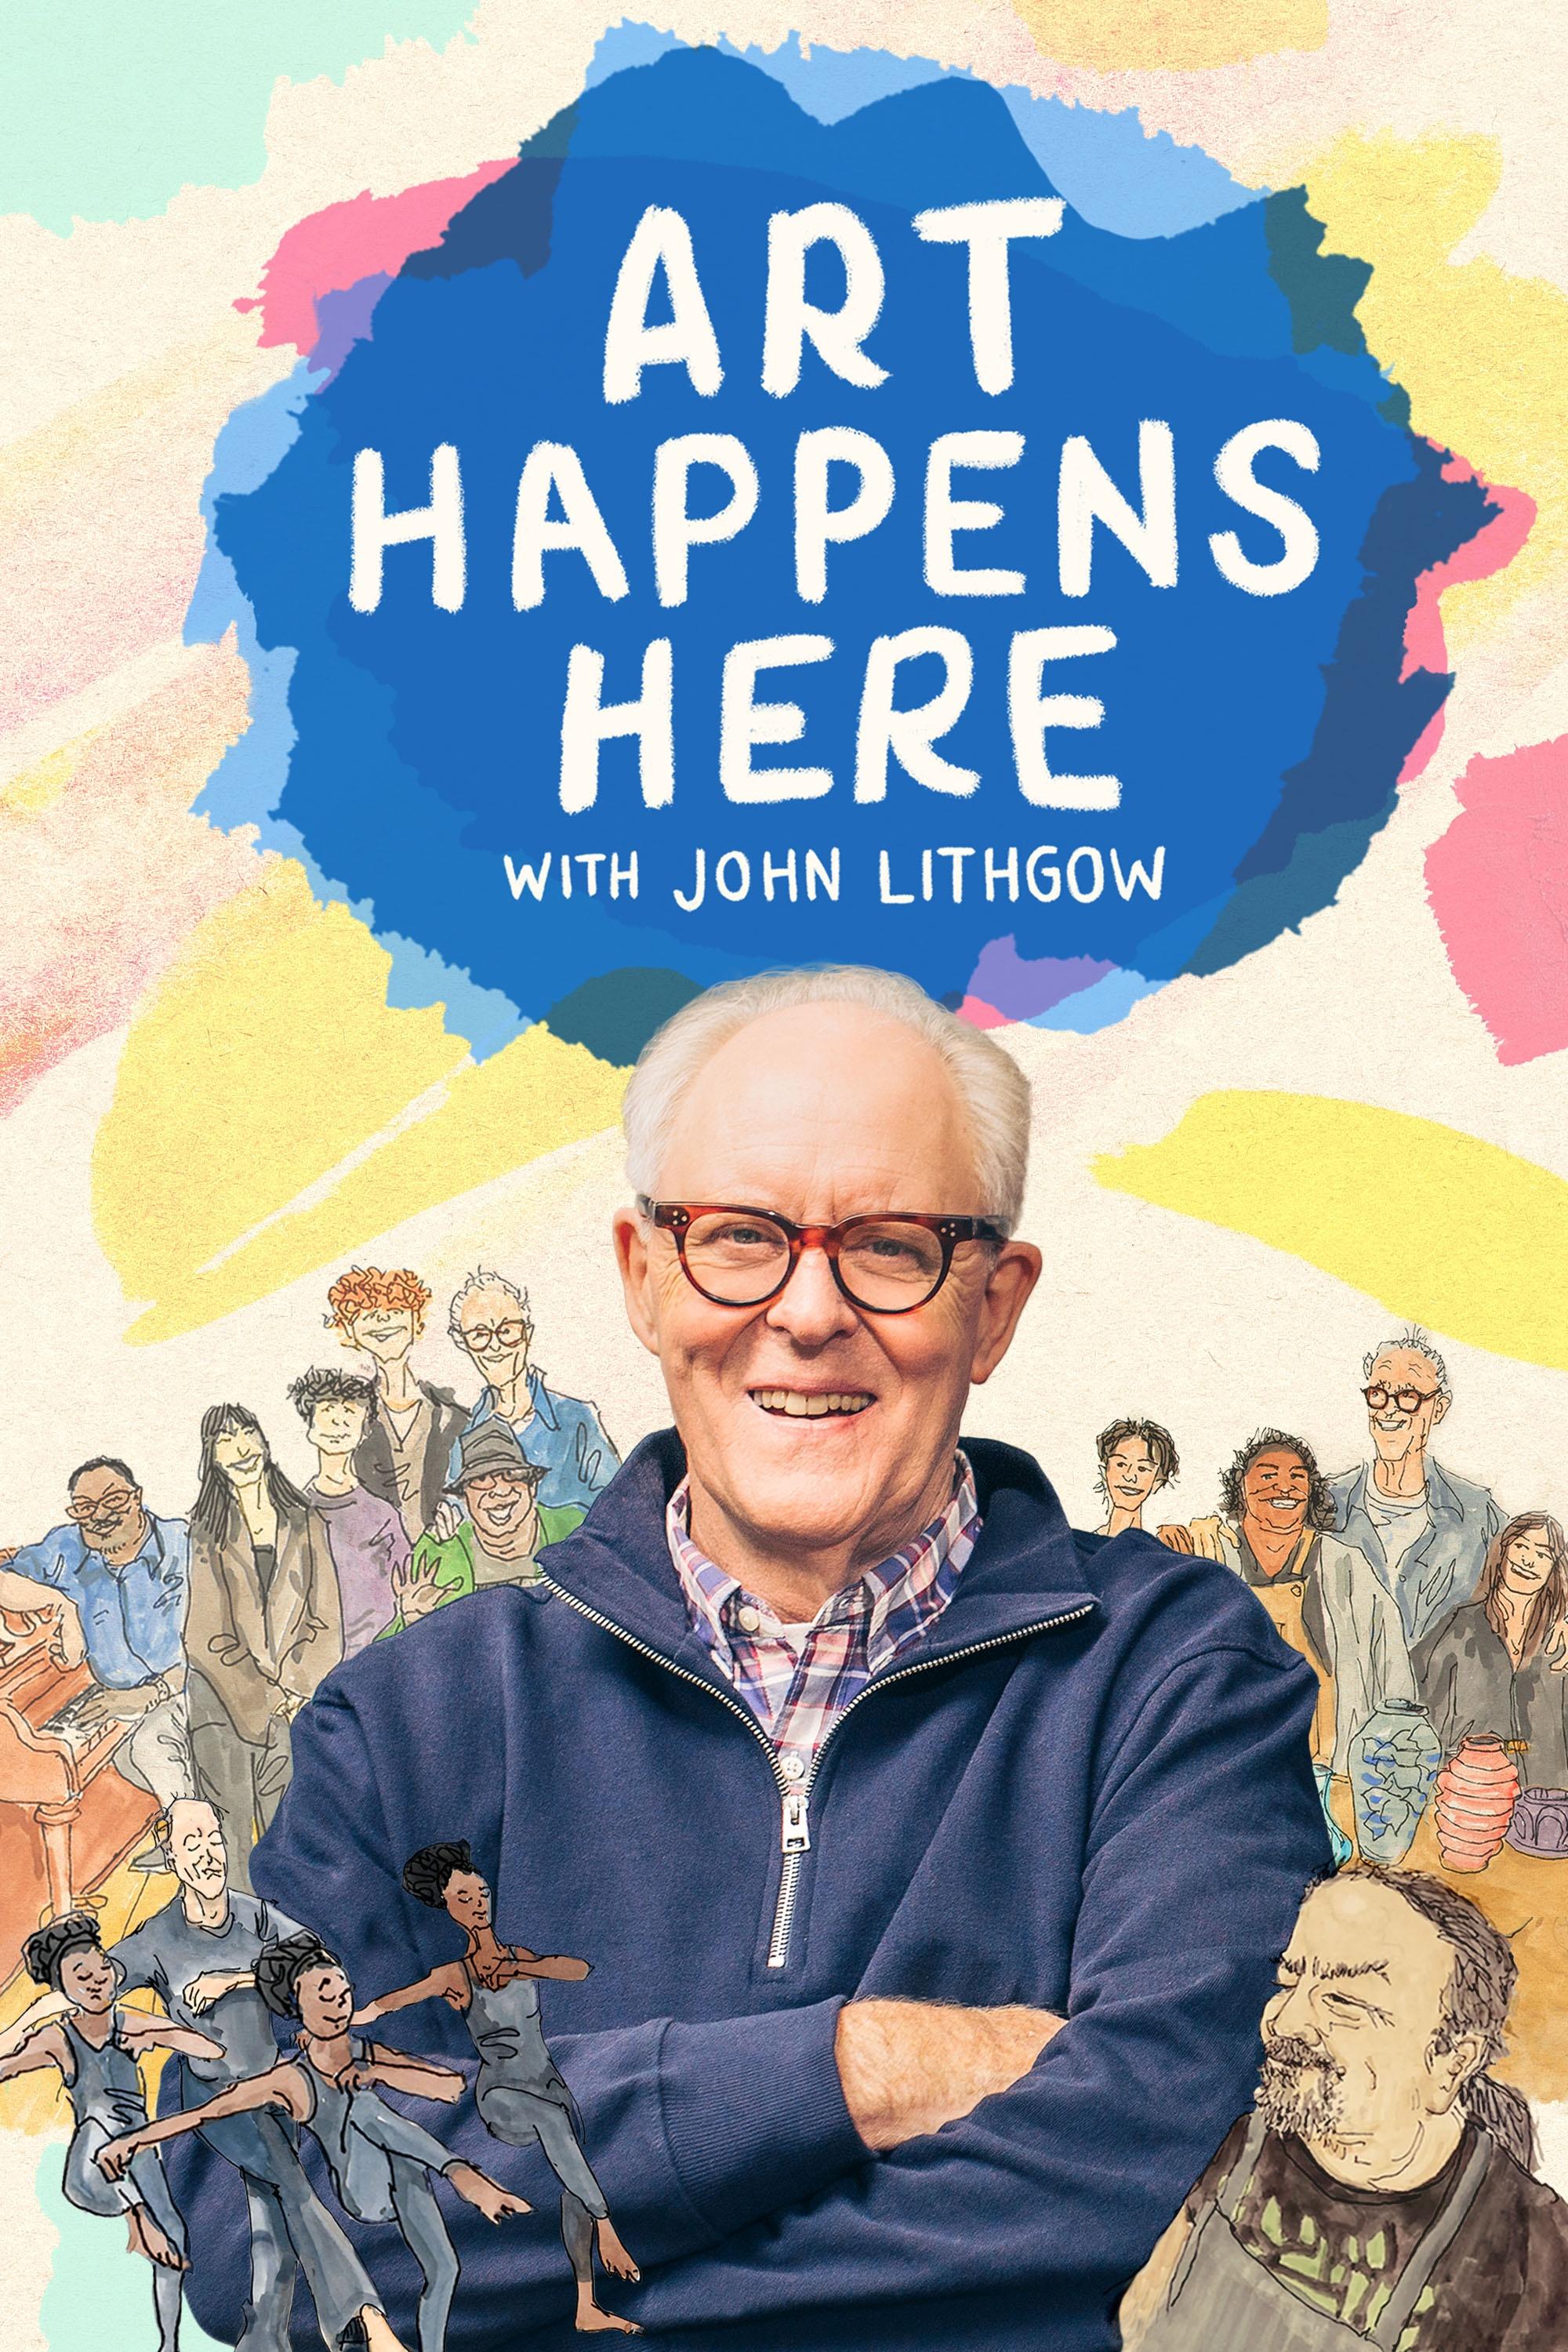 Art Happens Here with John Lithgow